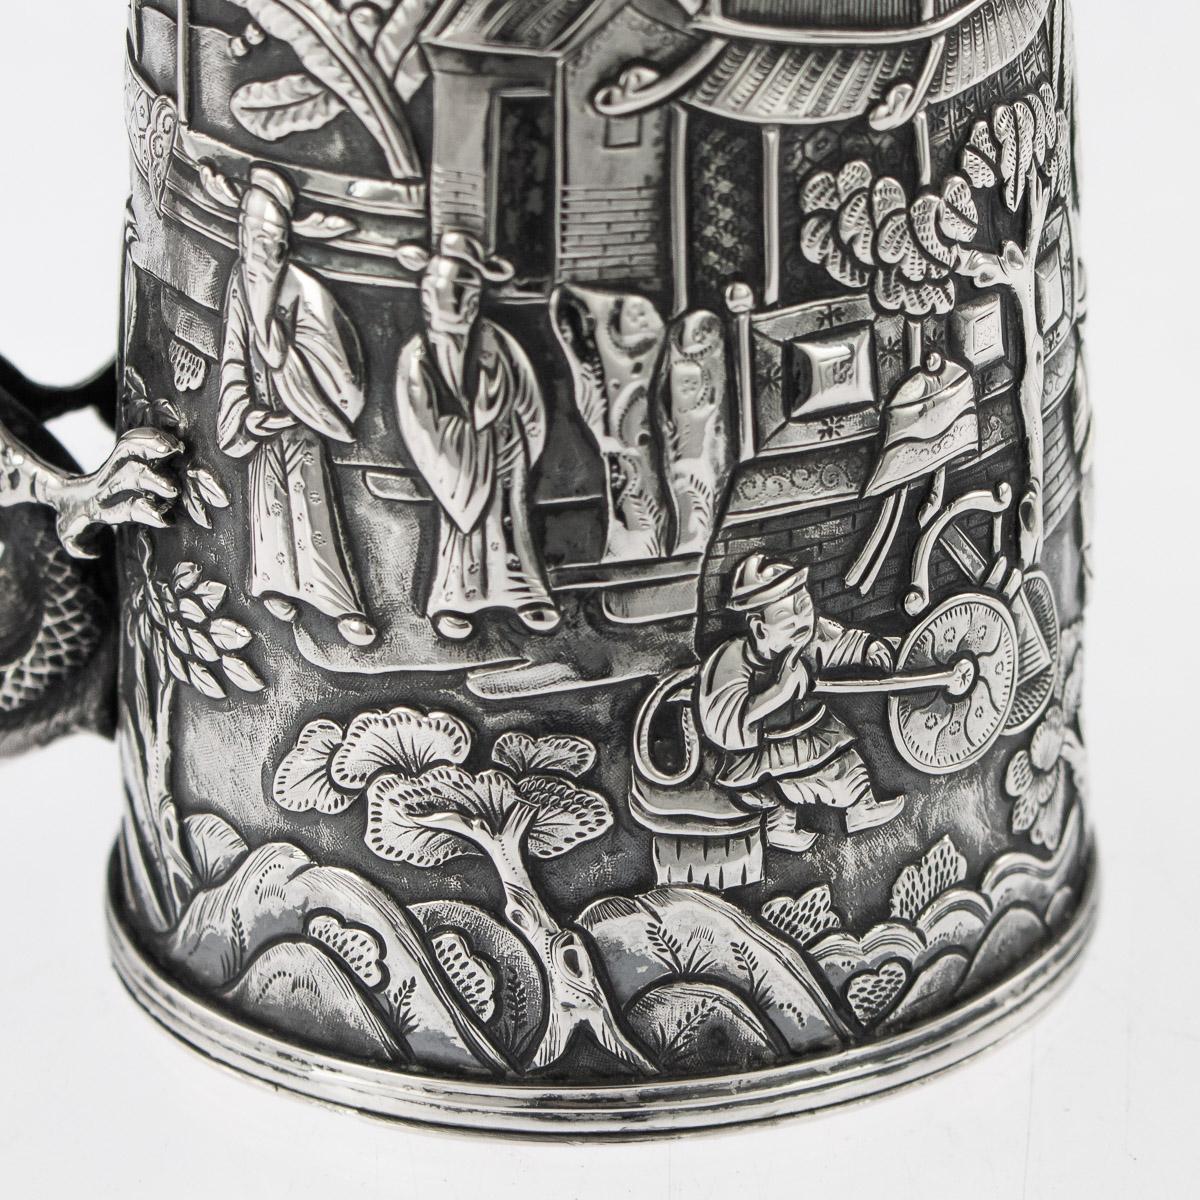 19thC Chinese Export Solid Silver Nobility Scenes Mug, Cutshing, c.1870 9